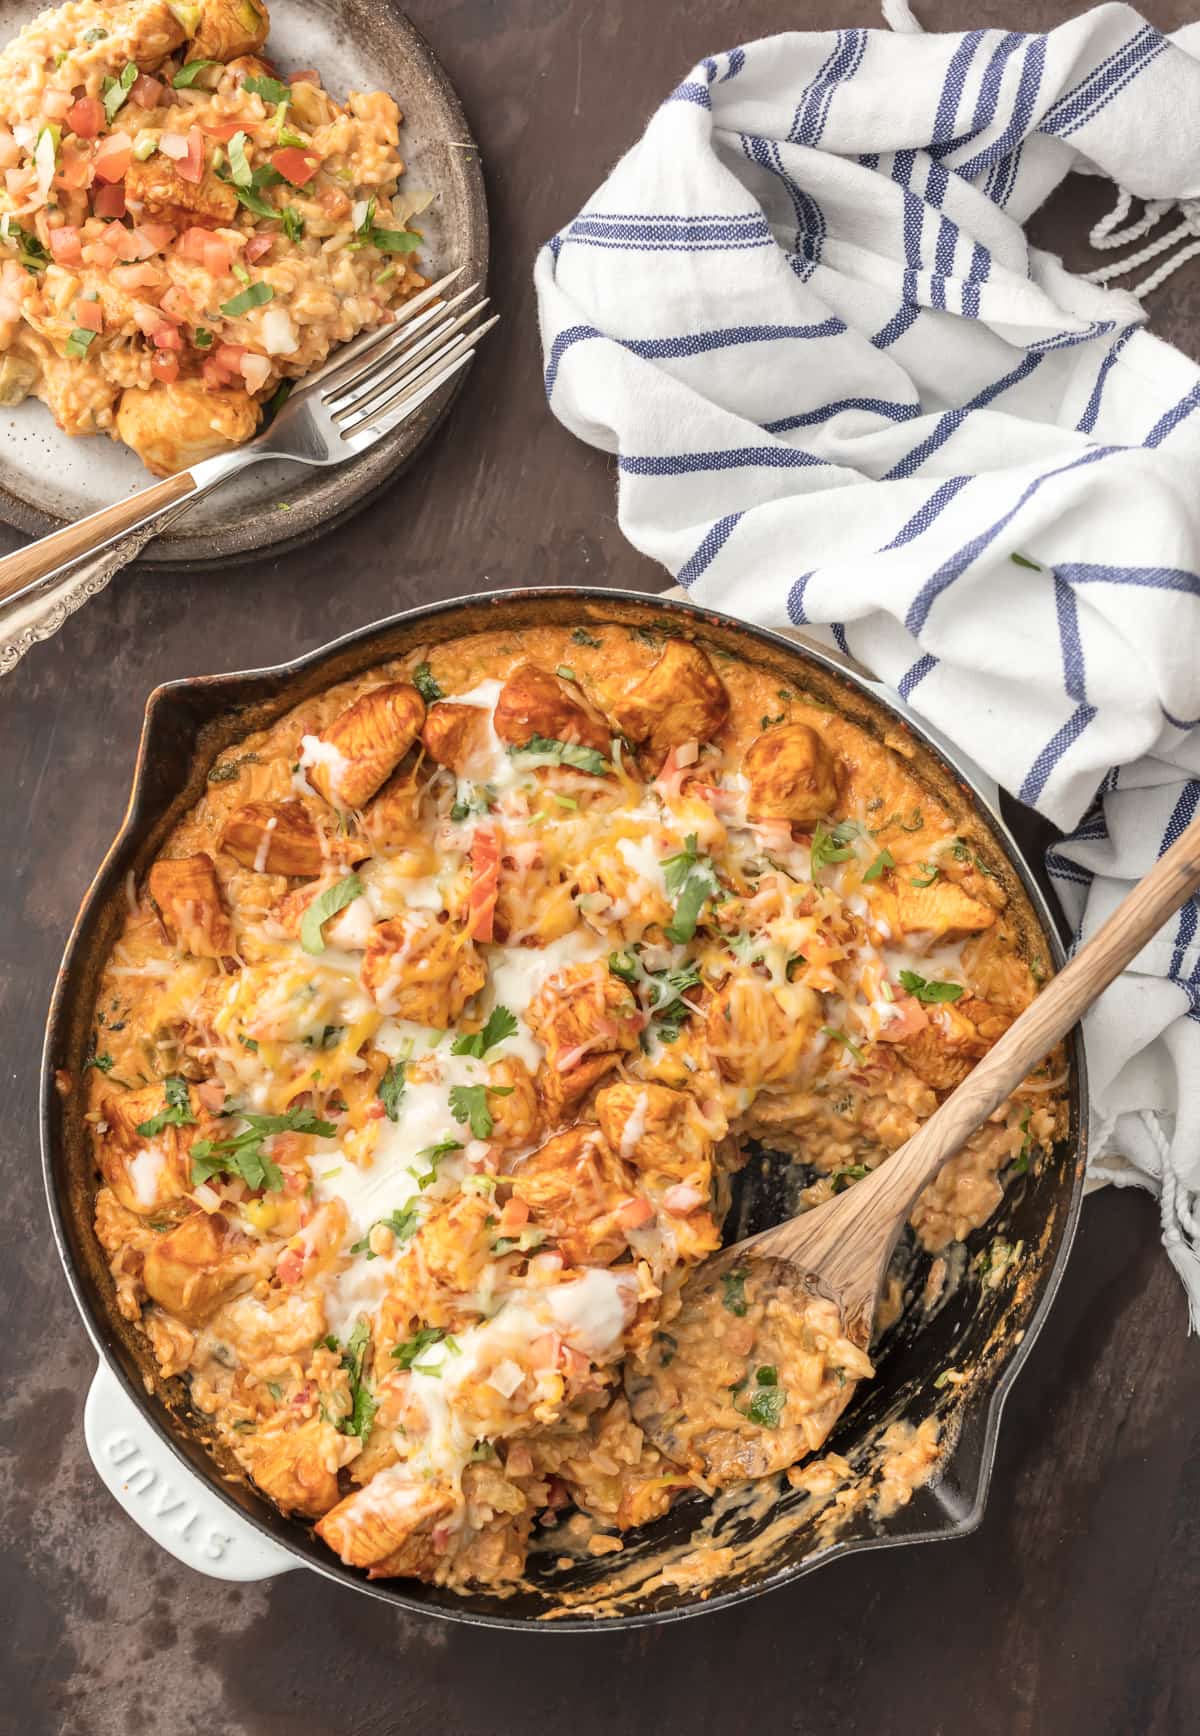 skillet filled with chicken, cheese, rice, and more